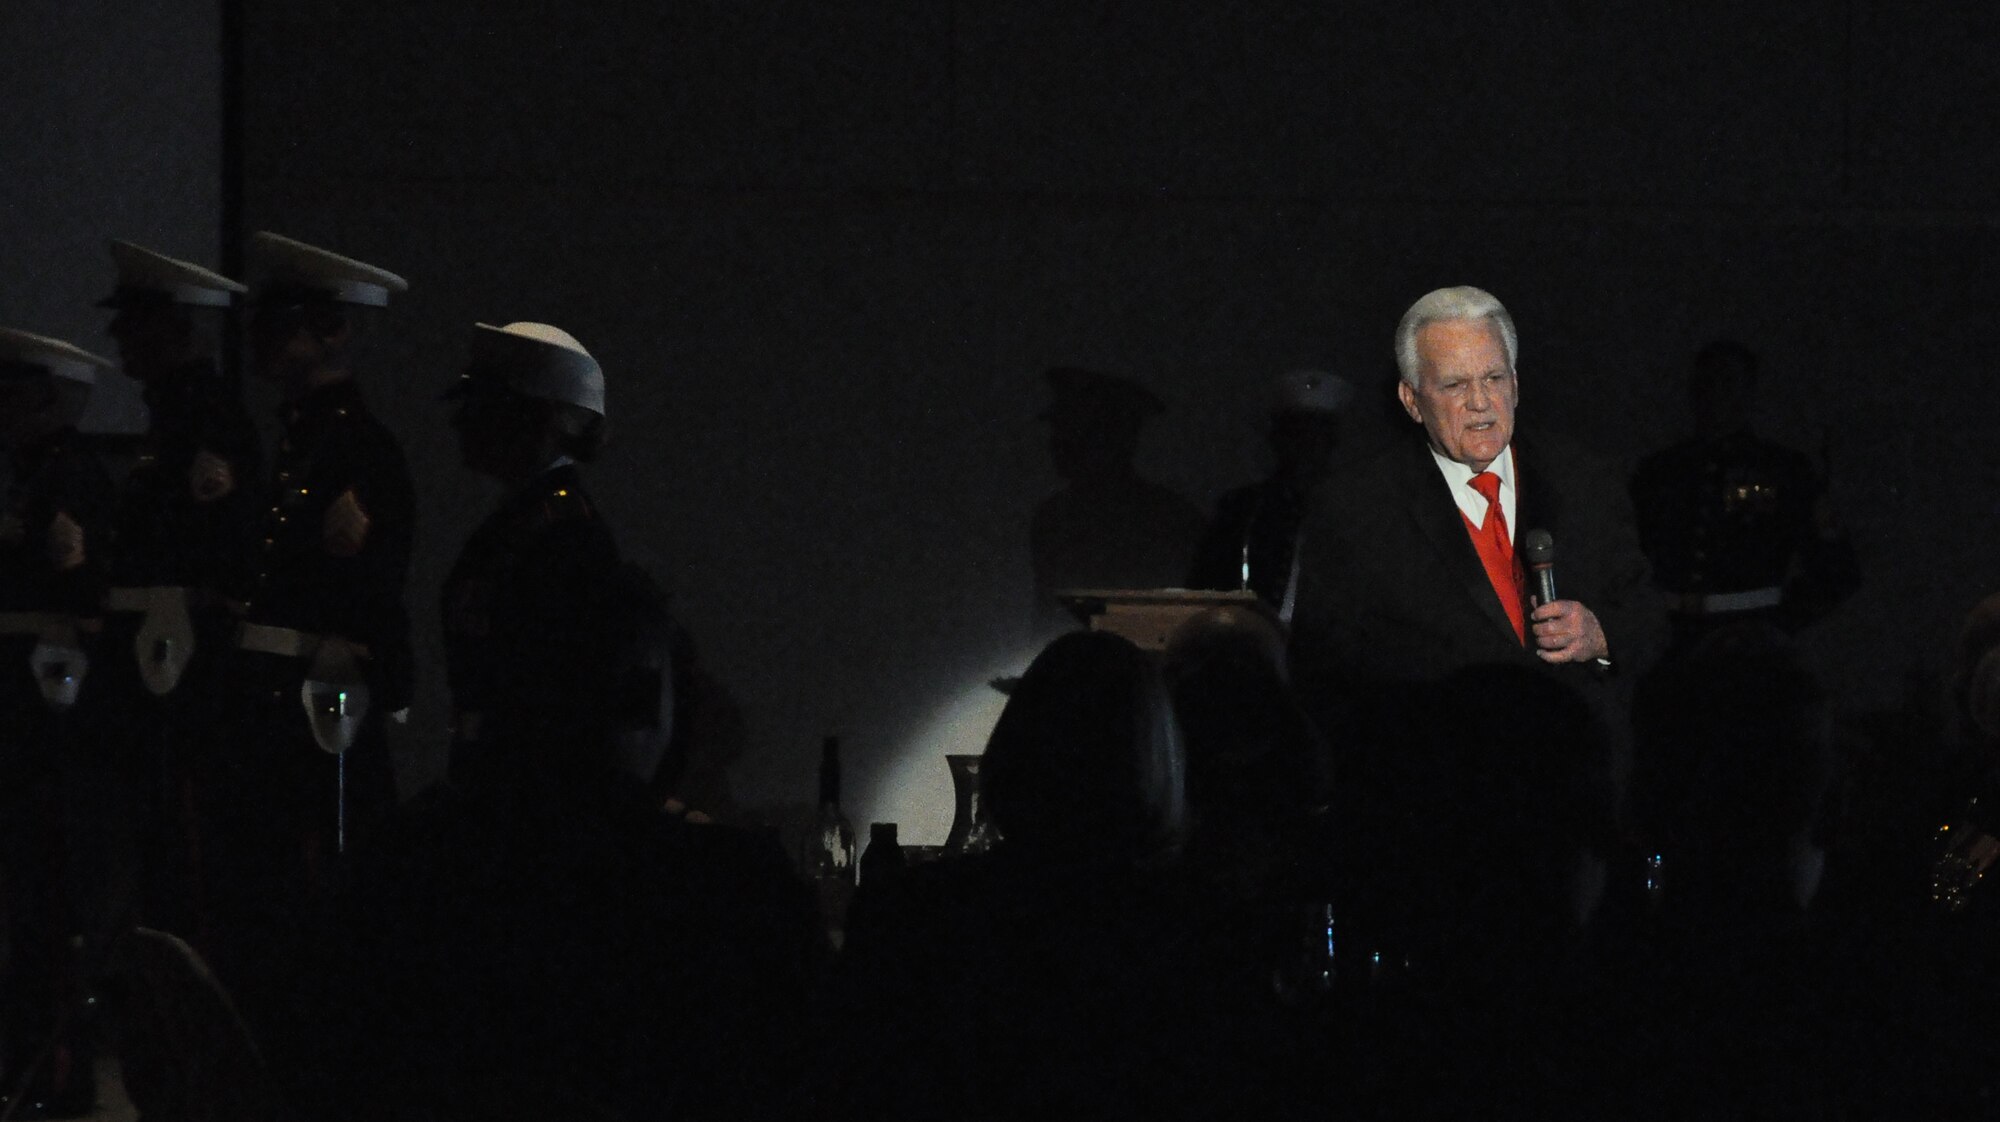 SAN ANGELO, Texas- Mr. Gene Hargraves, Korean War veteran, speaks during the Marine Corps Ball at the McNeese Convention Center Nov. 8. Hargraves was invited to be the guest speaker during the ball to speak about his history in the Marine Corps. (U.S. Air Force photo/ Airman 1st Class Erica Rodriguez)